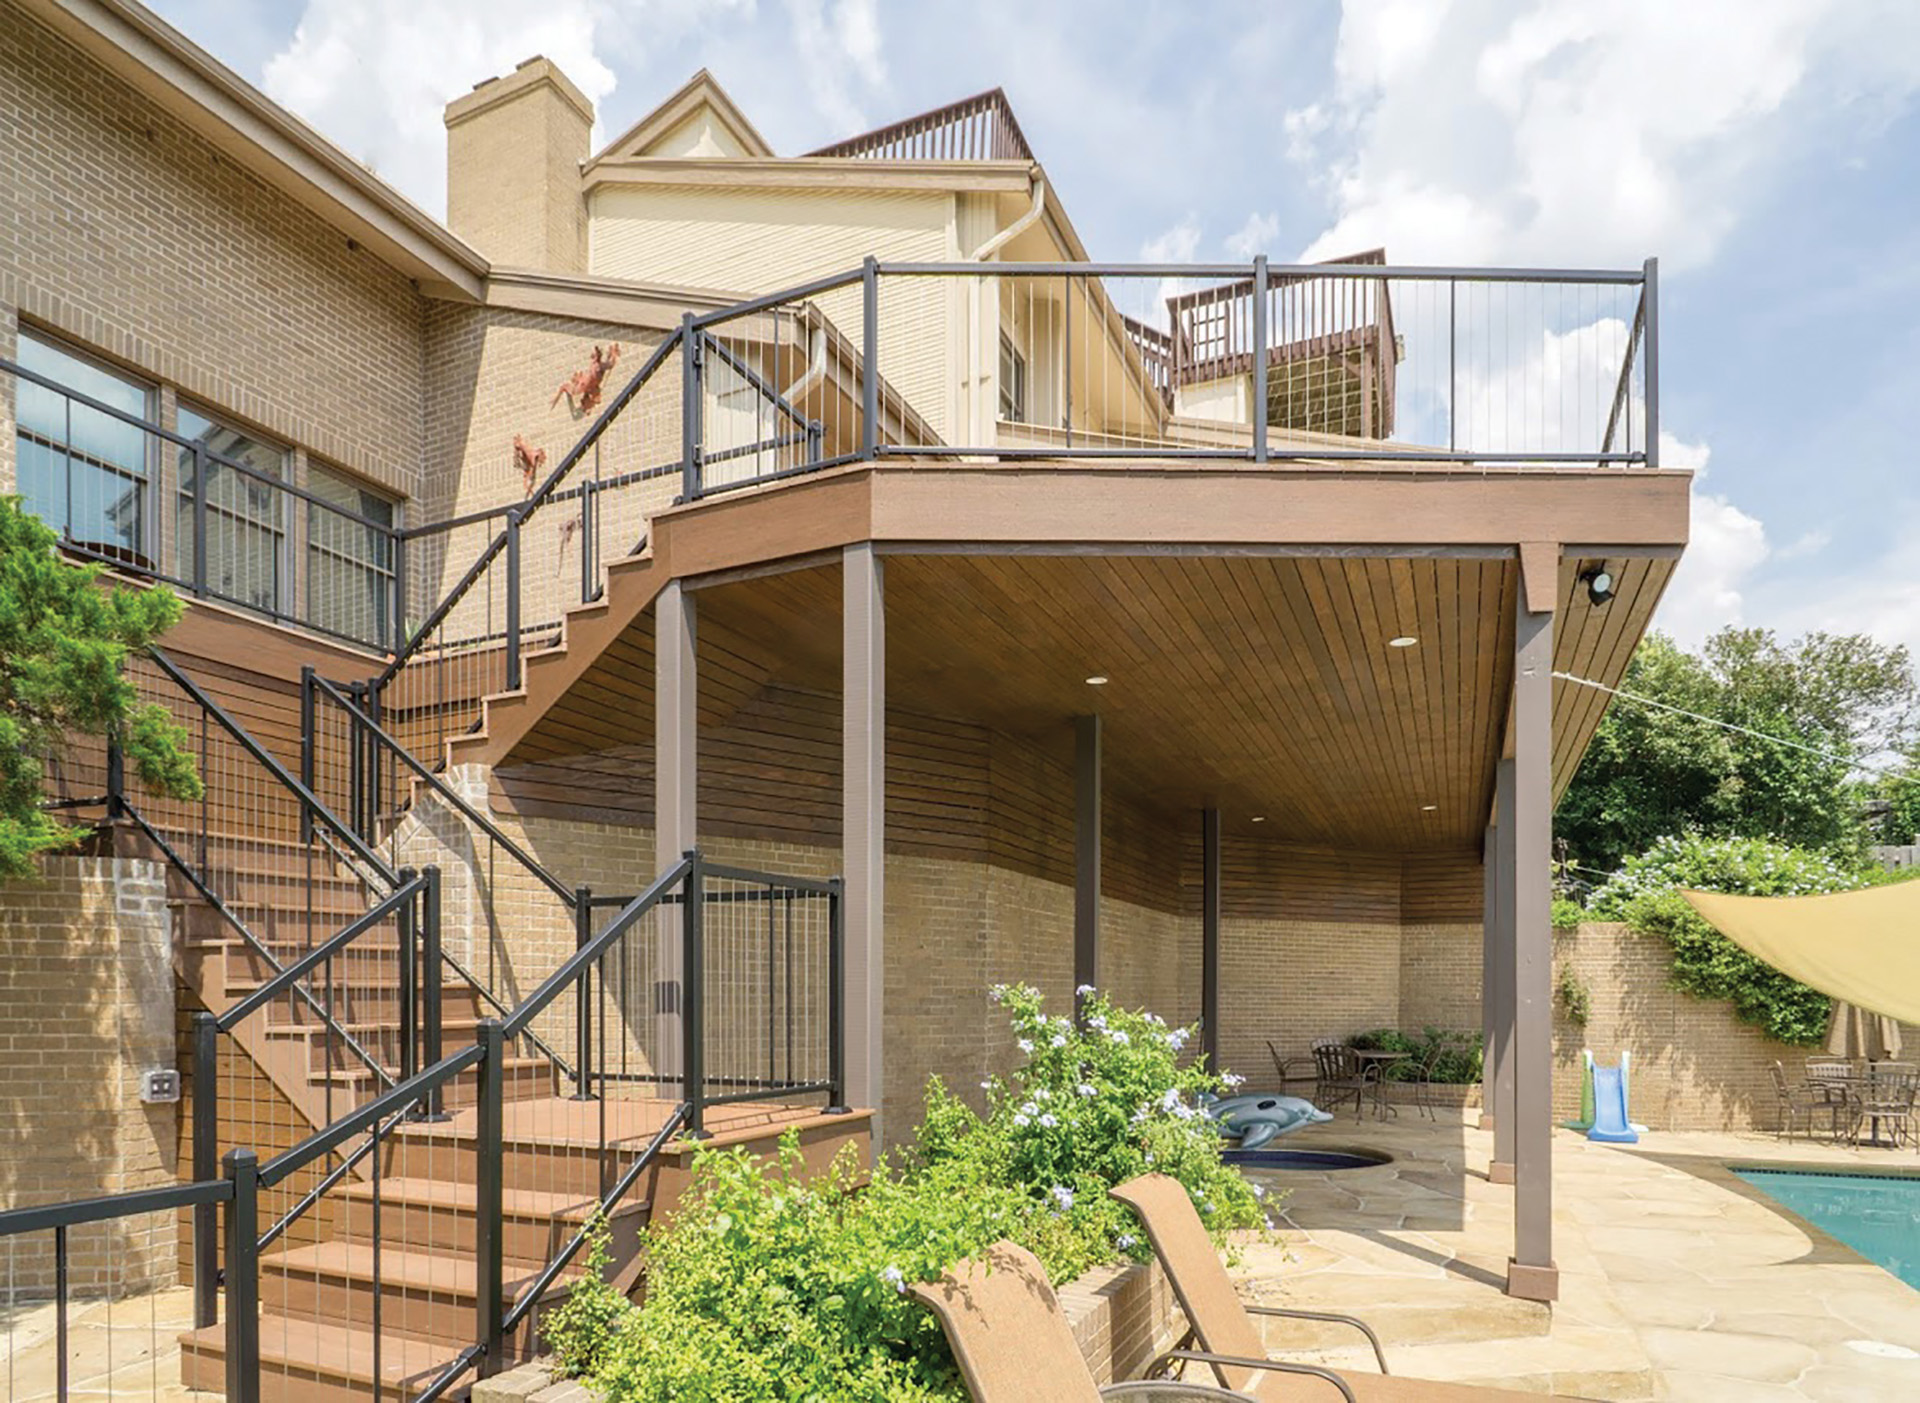 Multi-level outdoor deck featuring steel deck railings, overlooking a pool and patio area